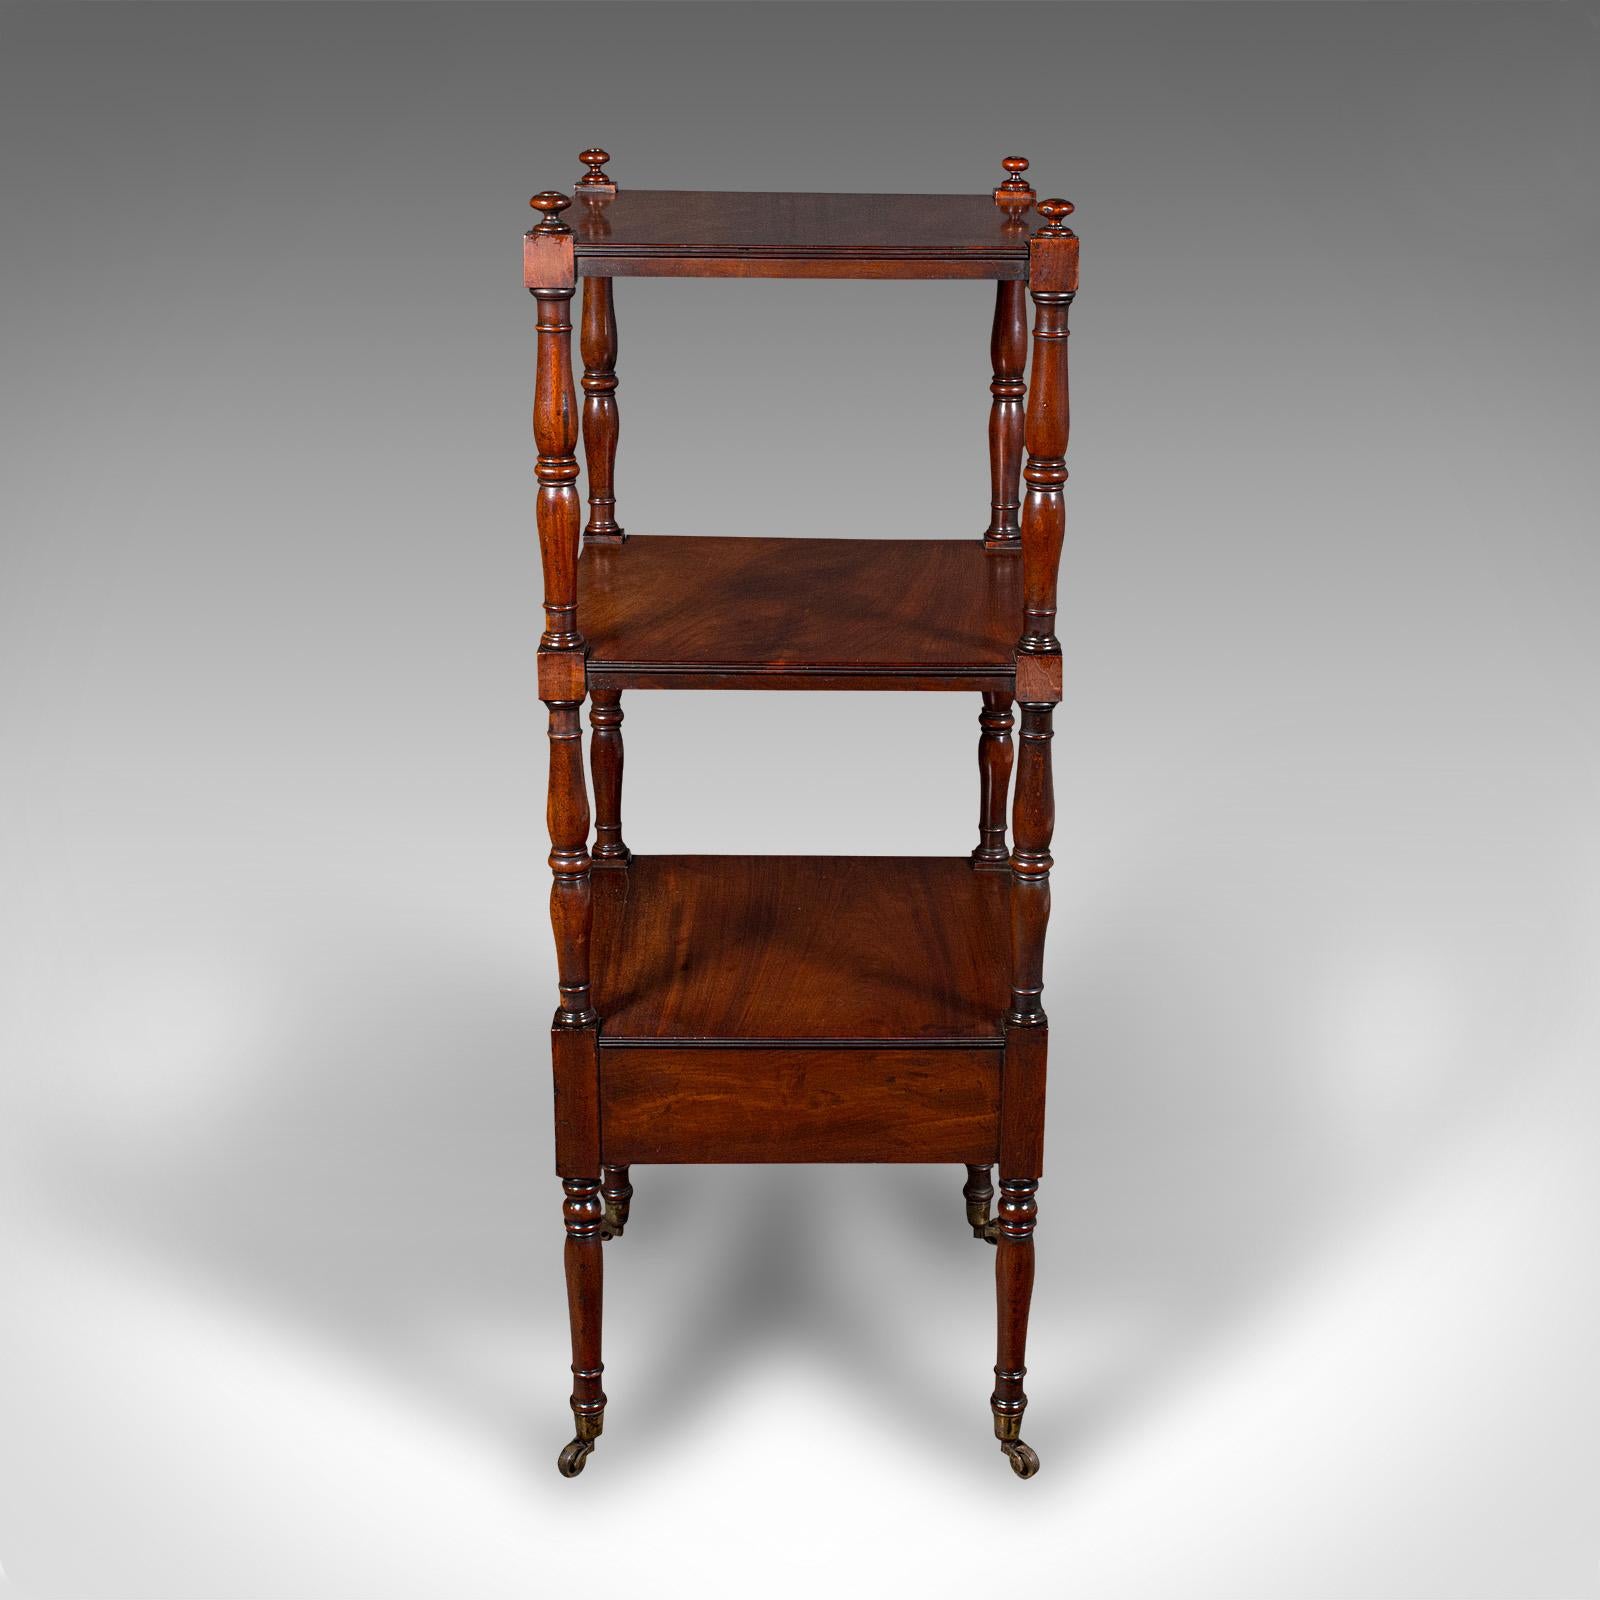 Wood Antique 3 Tier Whatnot, English, Open Display Stand, Late Georgian, Circa 1800 For Sale